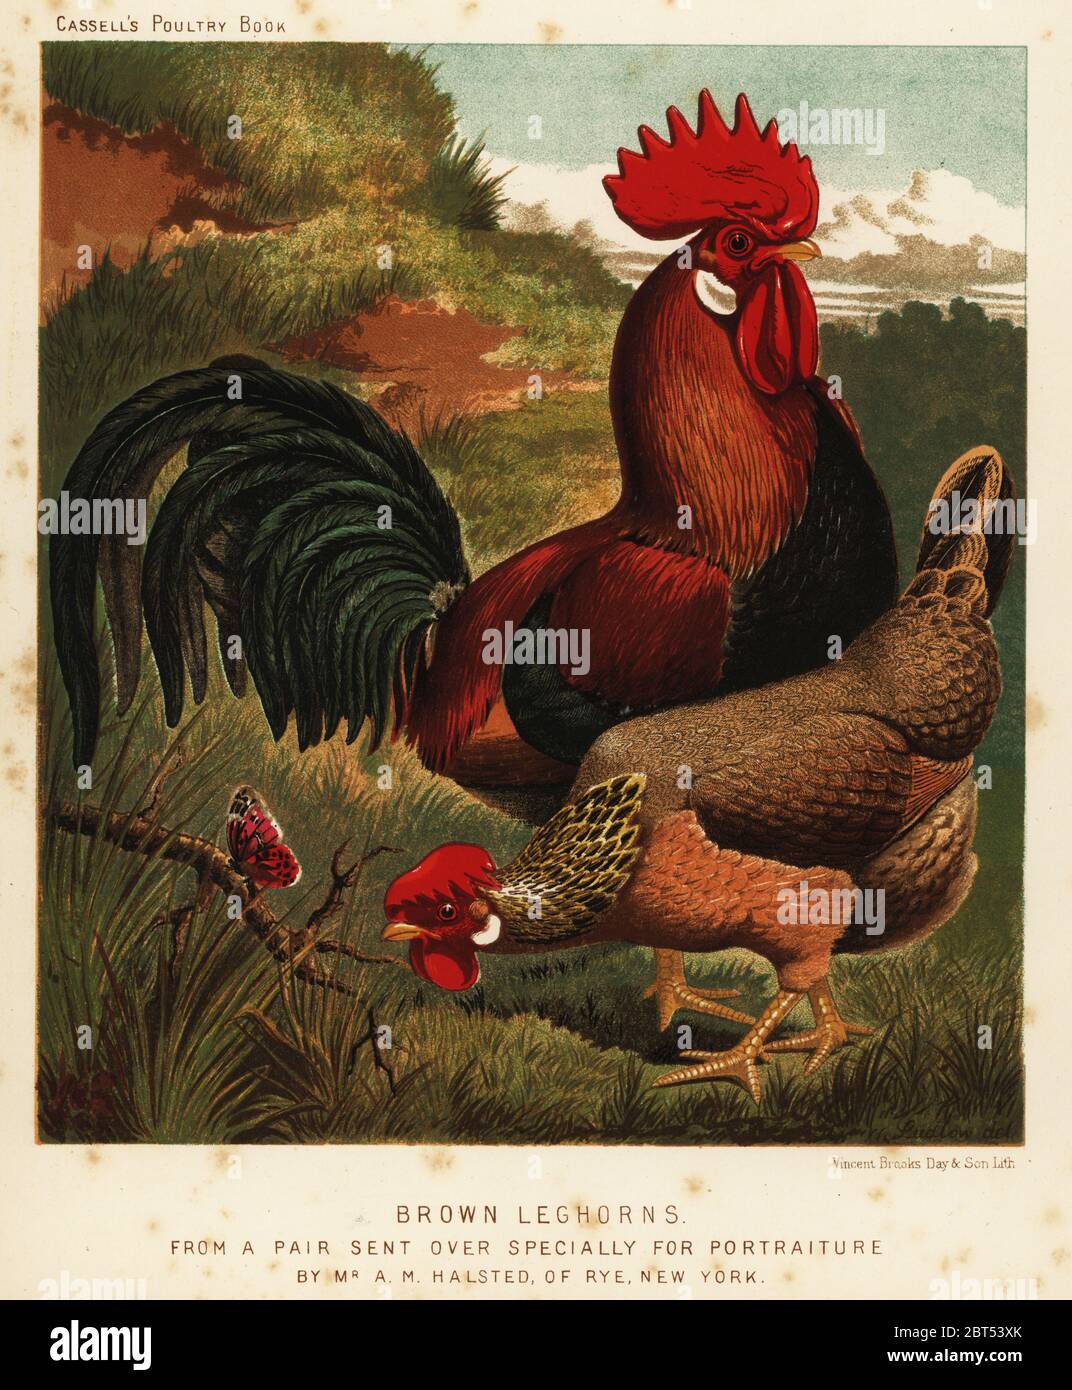 Brown leghorns or Livorno chickens, Gallus gallus domesticus. Chromolithograph by Vincent Brooks Day & Son after an illustration by J.W. Ludlow from Lewis Wrights The Illustrated Book of Poultry, Cassell, London, 1890. Stock Photo